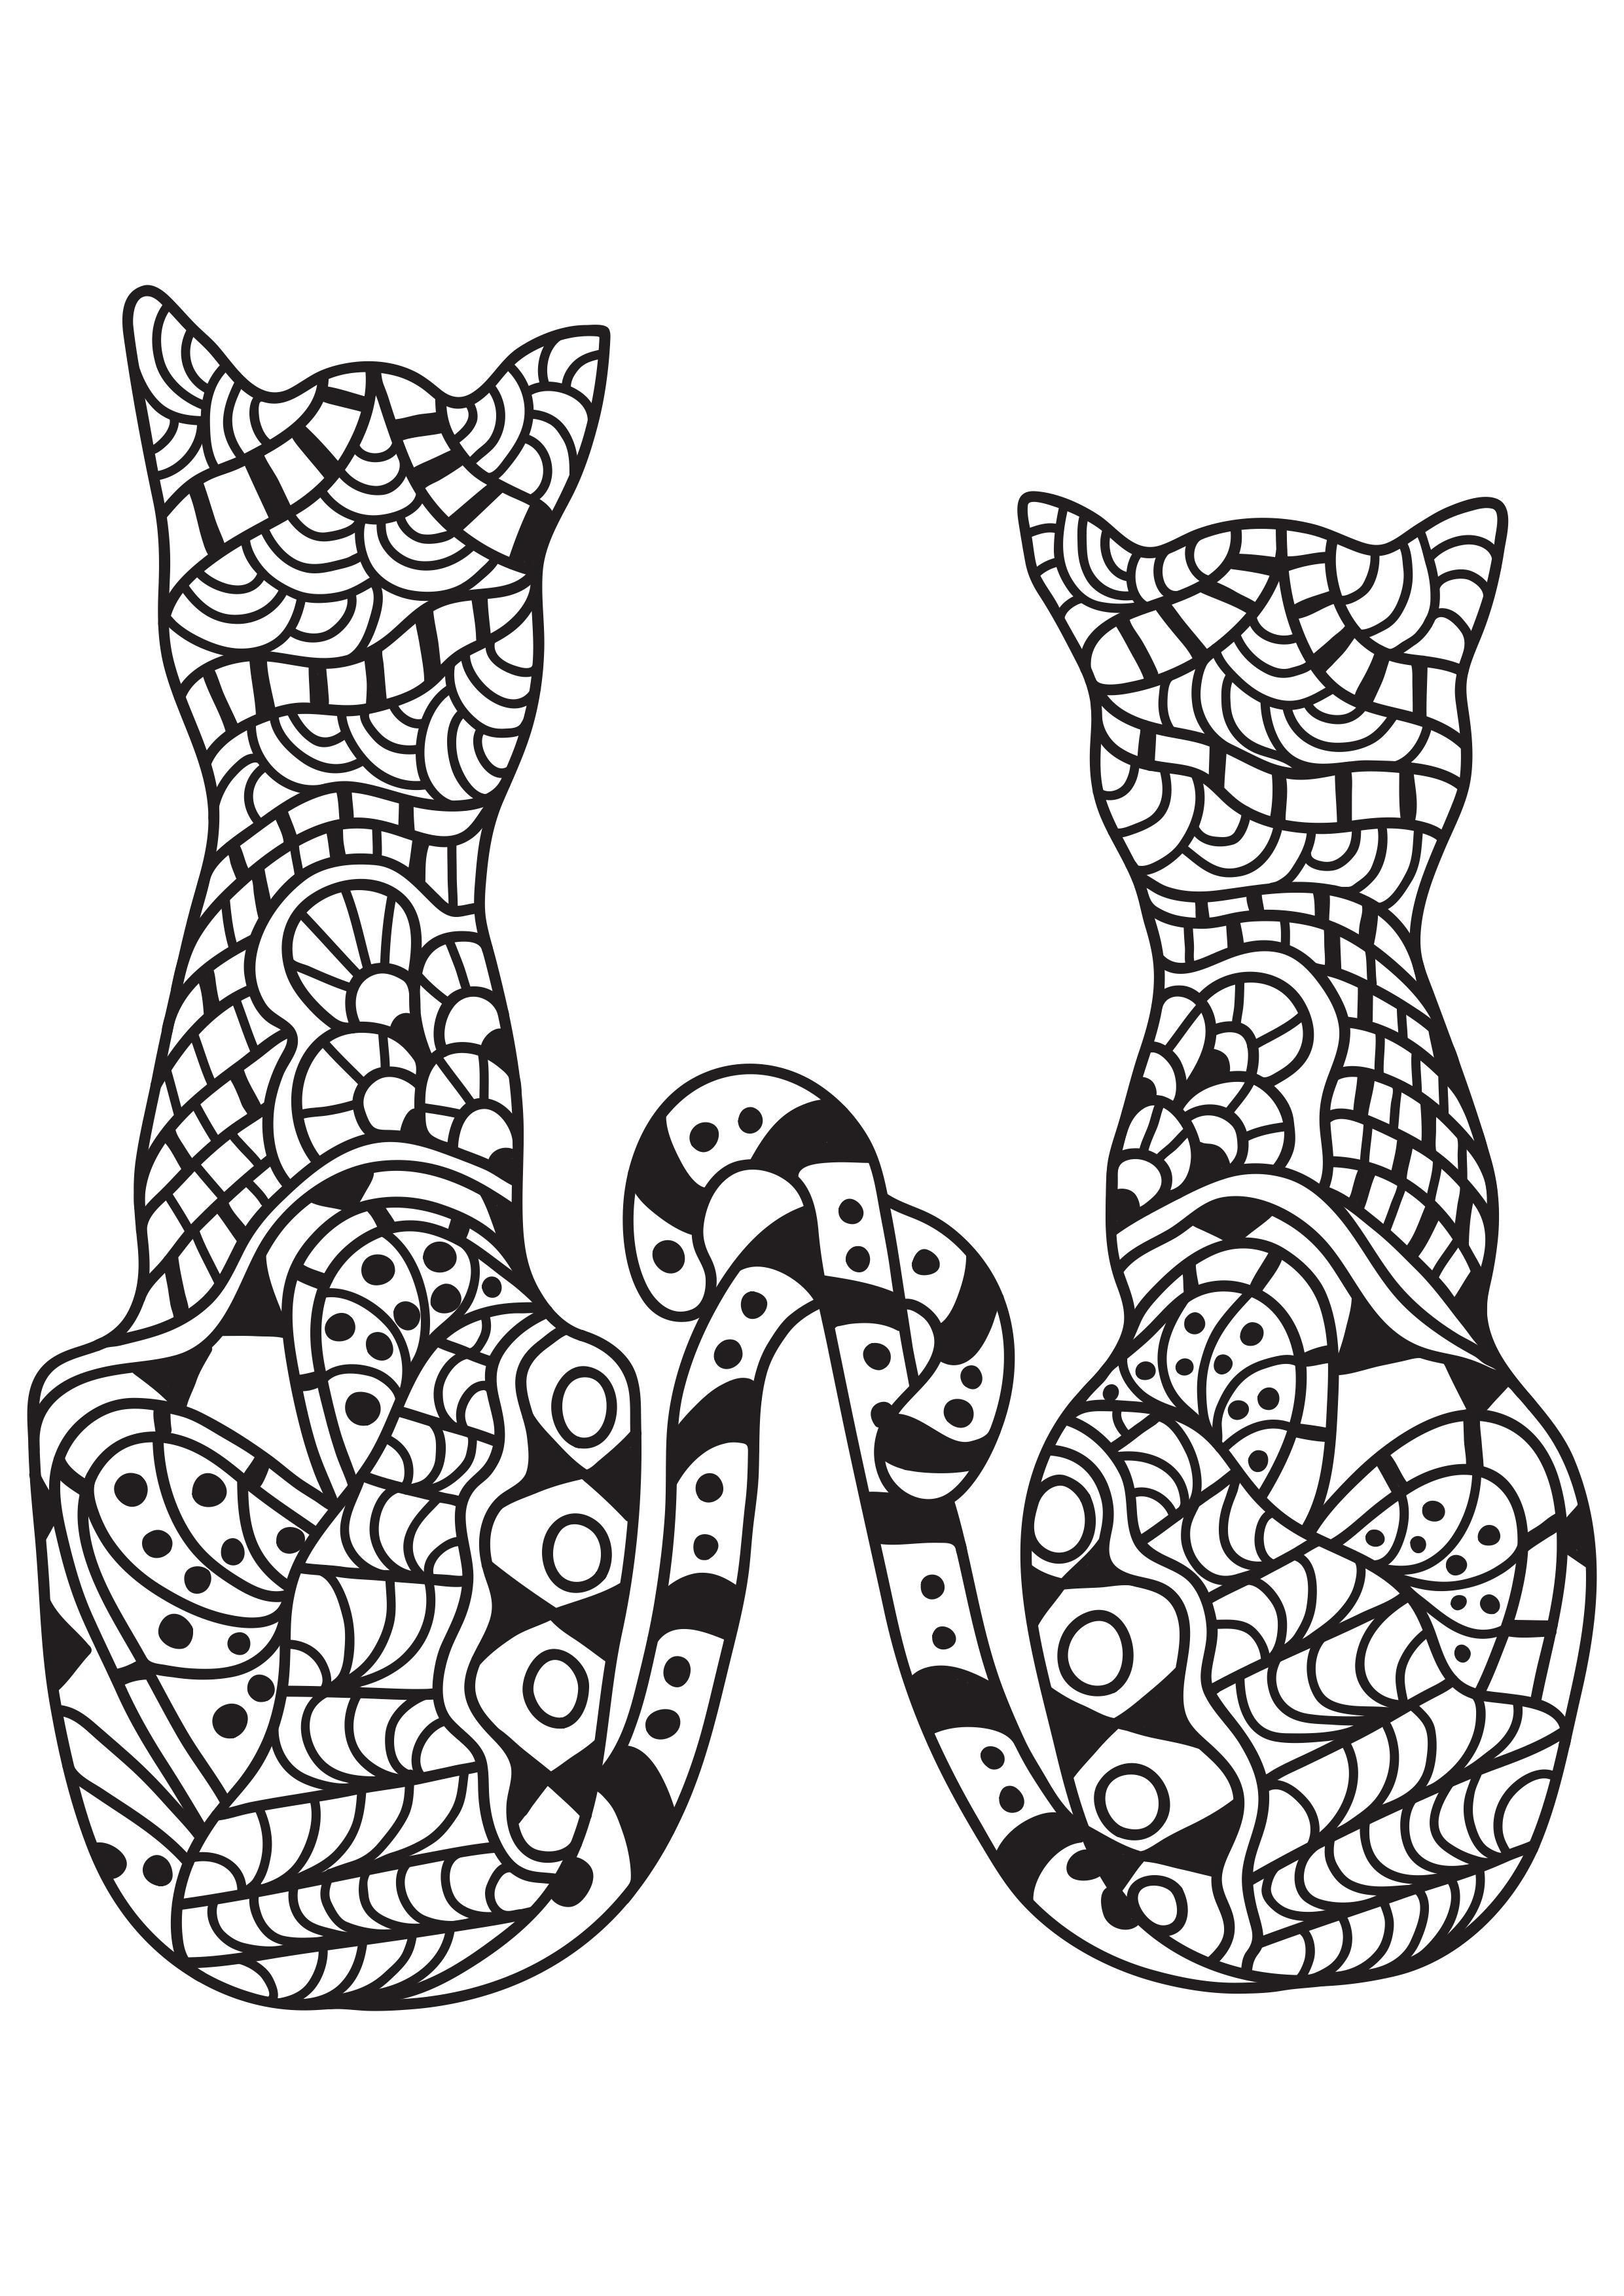 Coloring page 2 cats